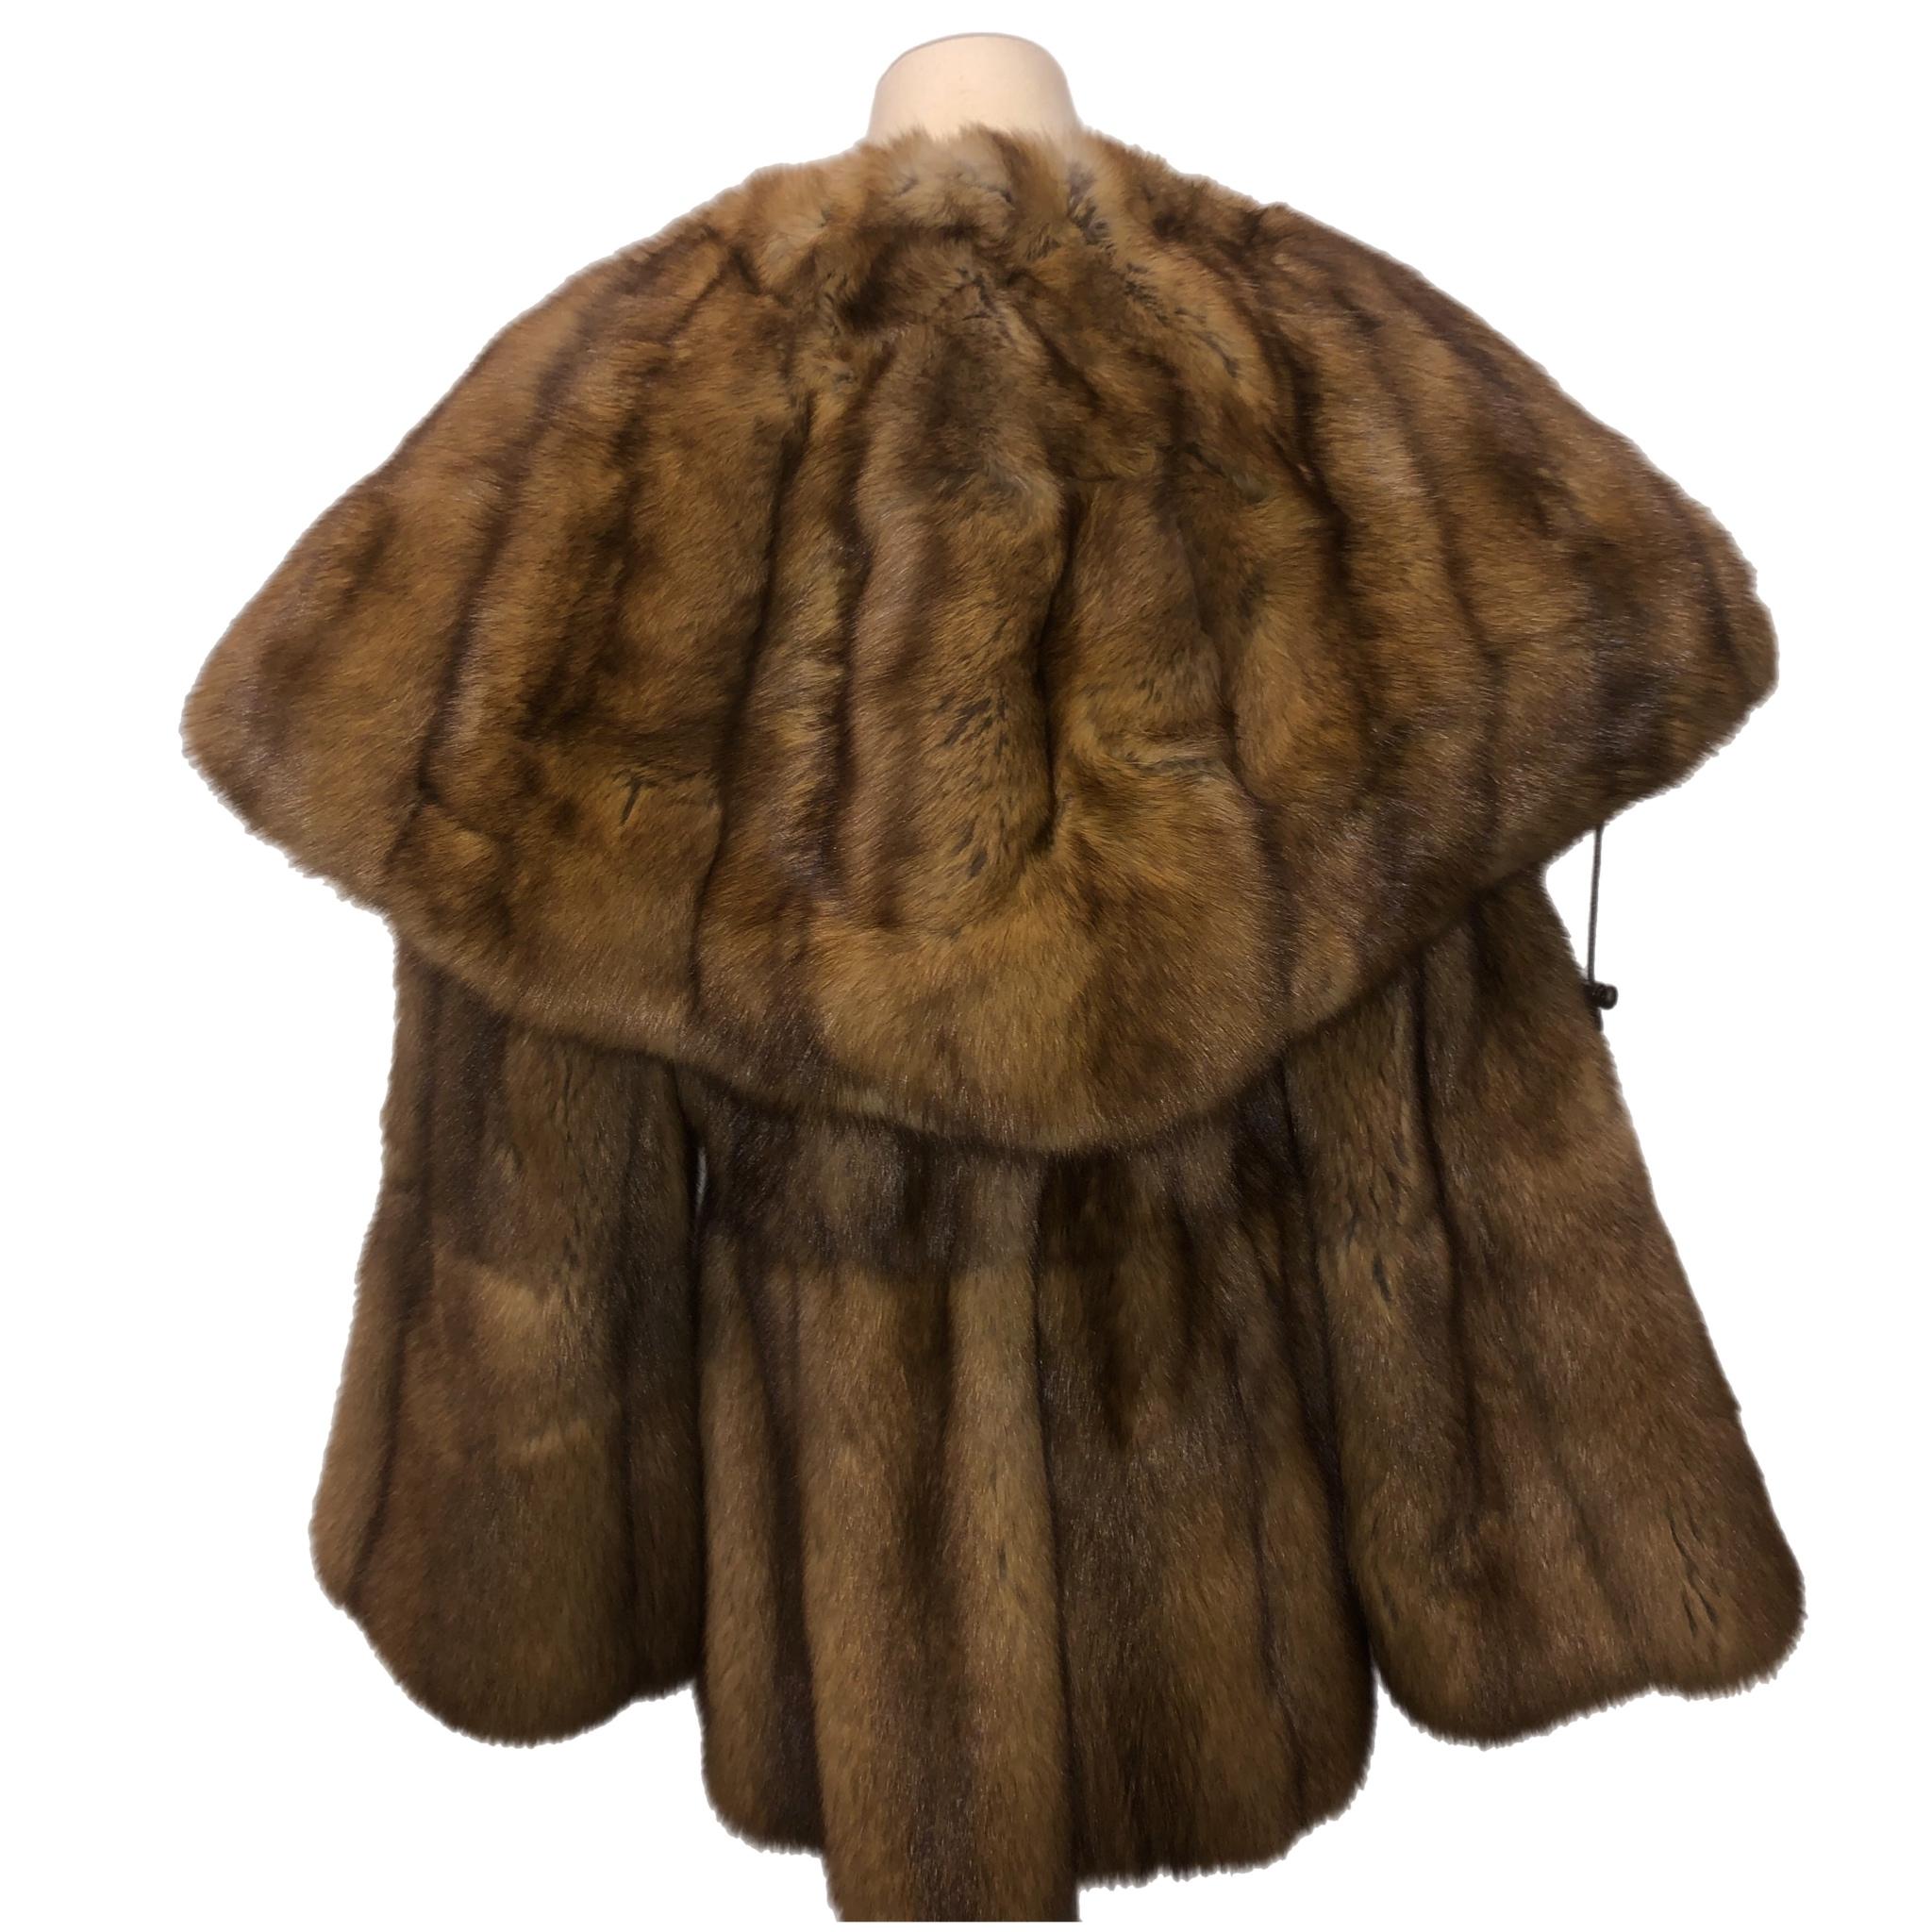 Bisang Russian Sable fur coat size 14-16 tags 65000$ For Sale 8